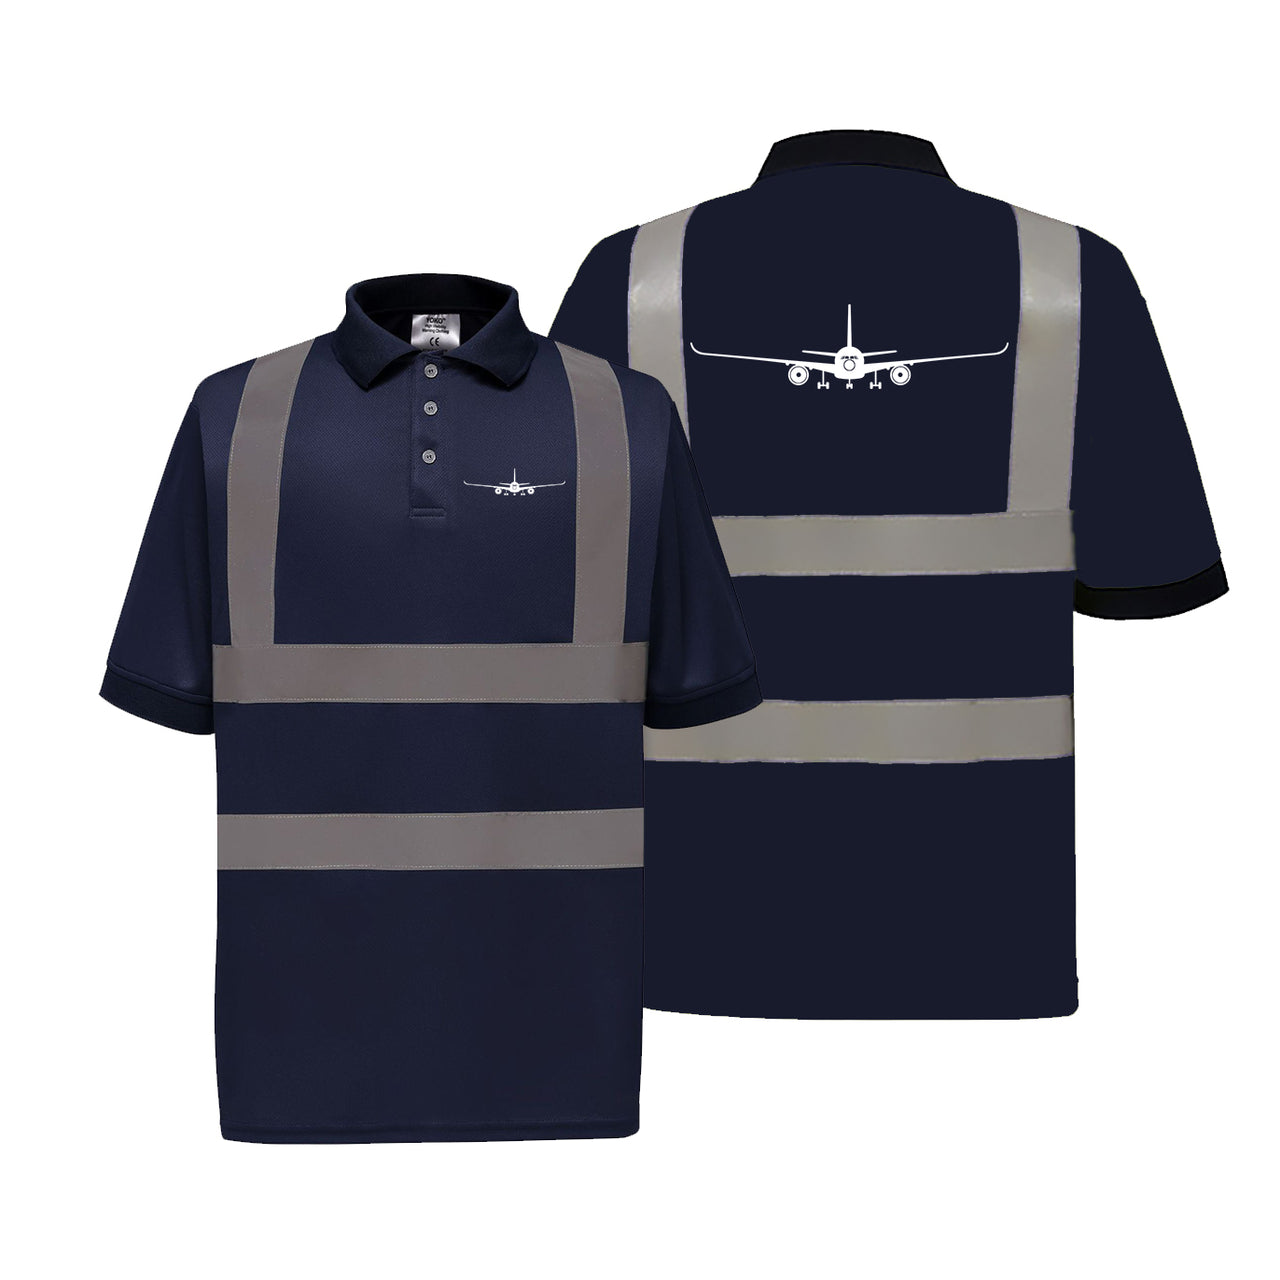 Airbus A350 Silhouette Designed Reflective Polo T-Shirts